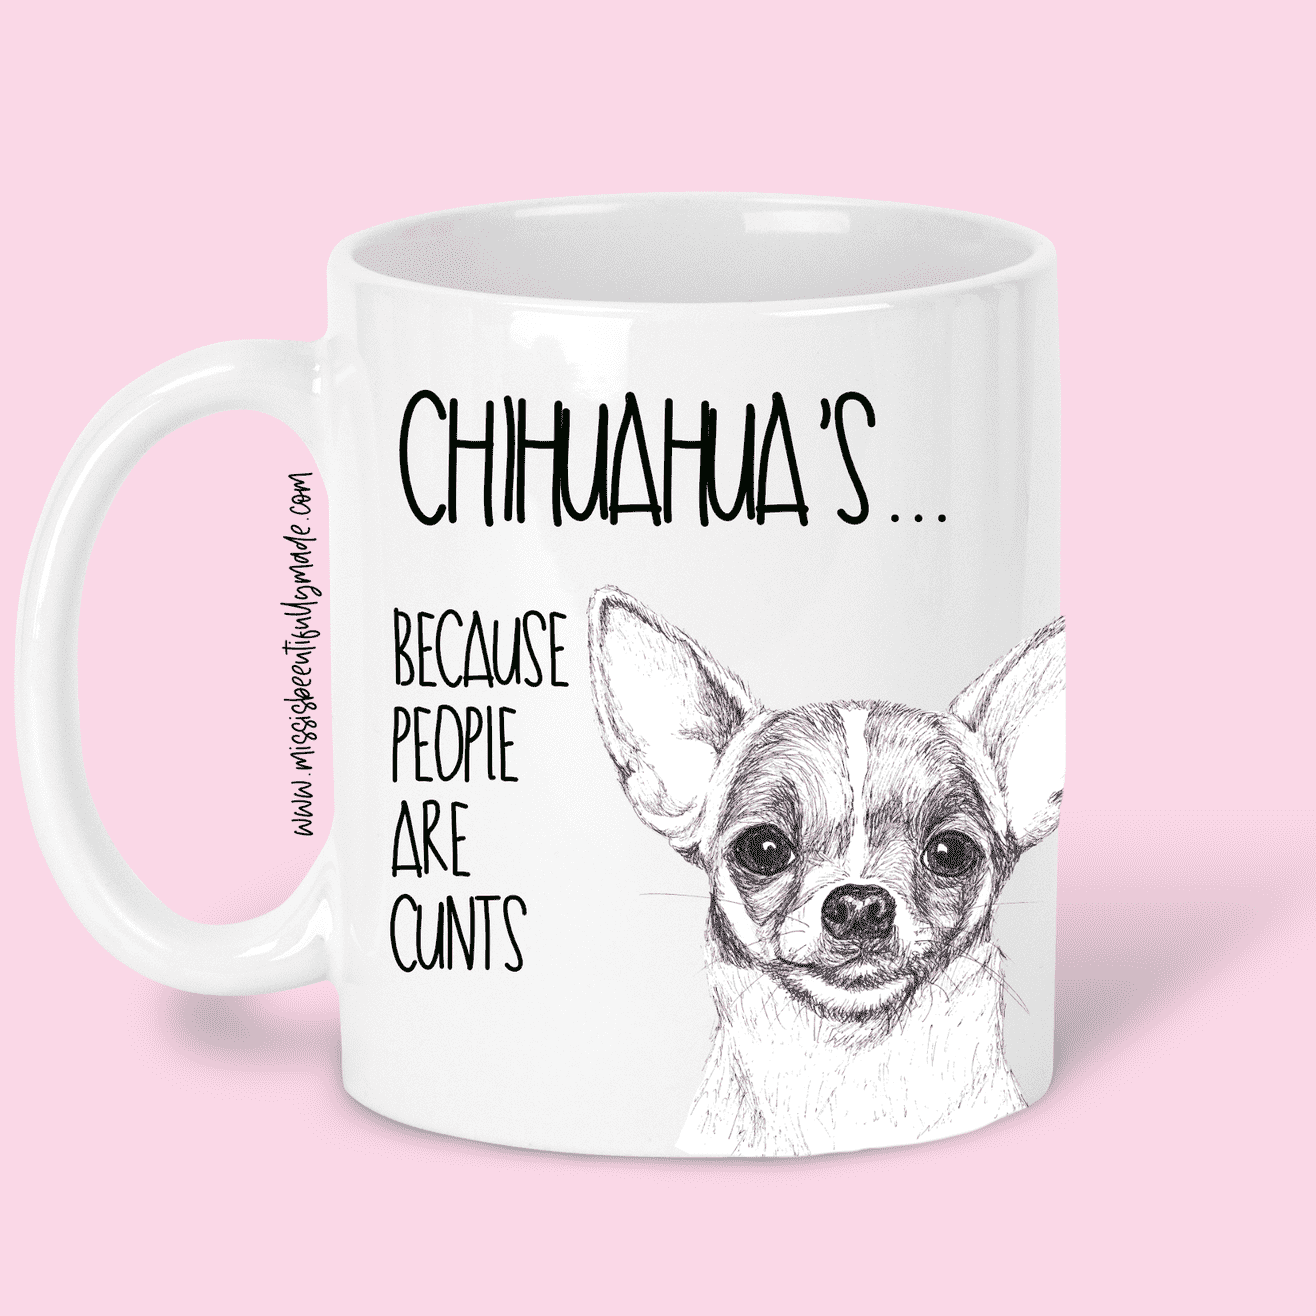 Chihuahua... Because people are cunts - 11 oz  - Ceramic - Dishwasher safe  - Microwave safe  - Sublimation printed - Different breeds available  